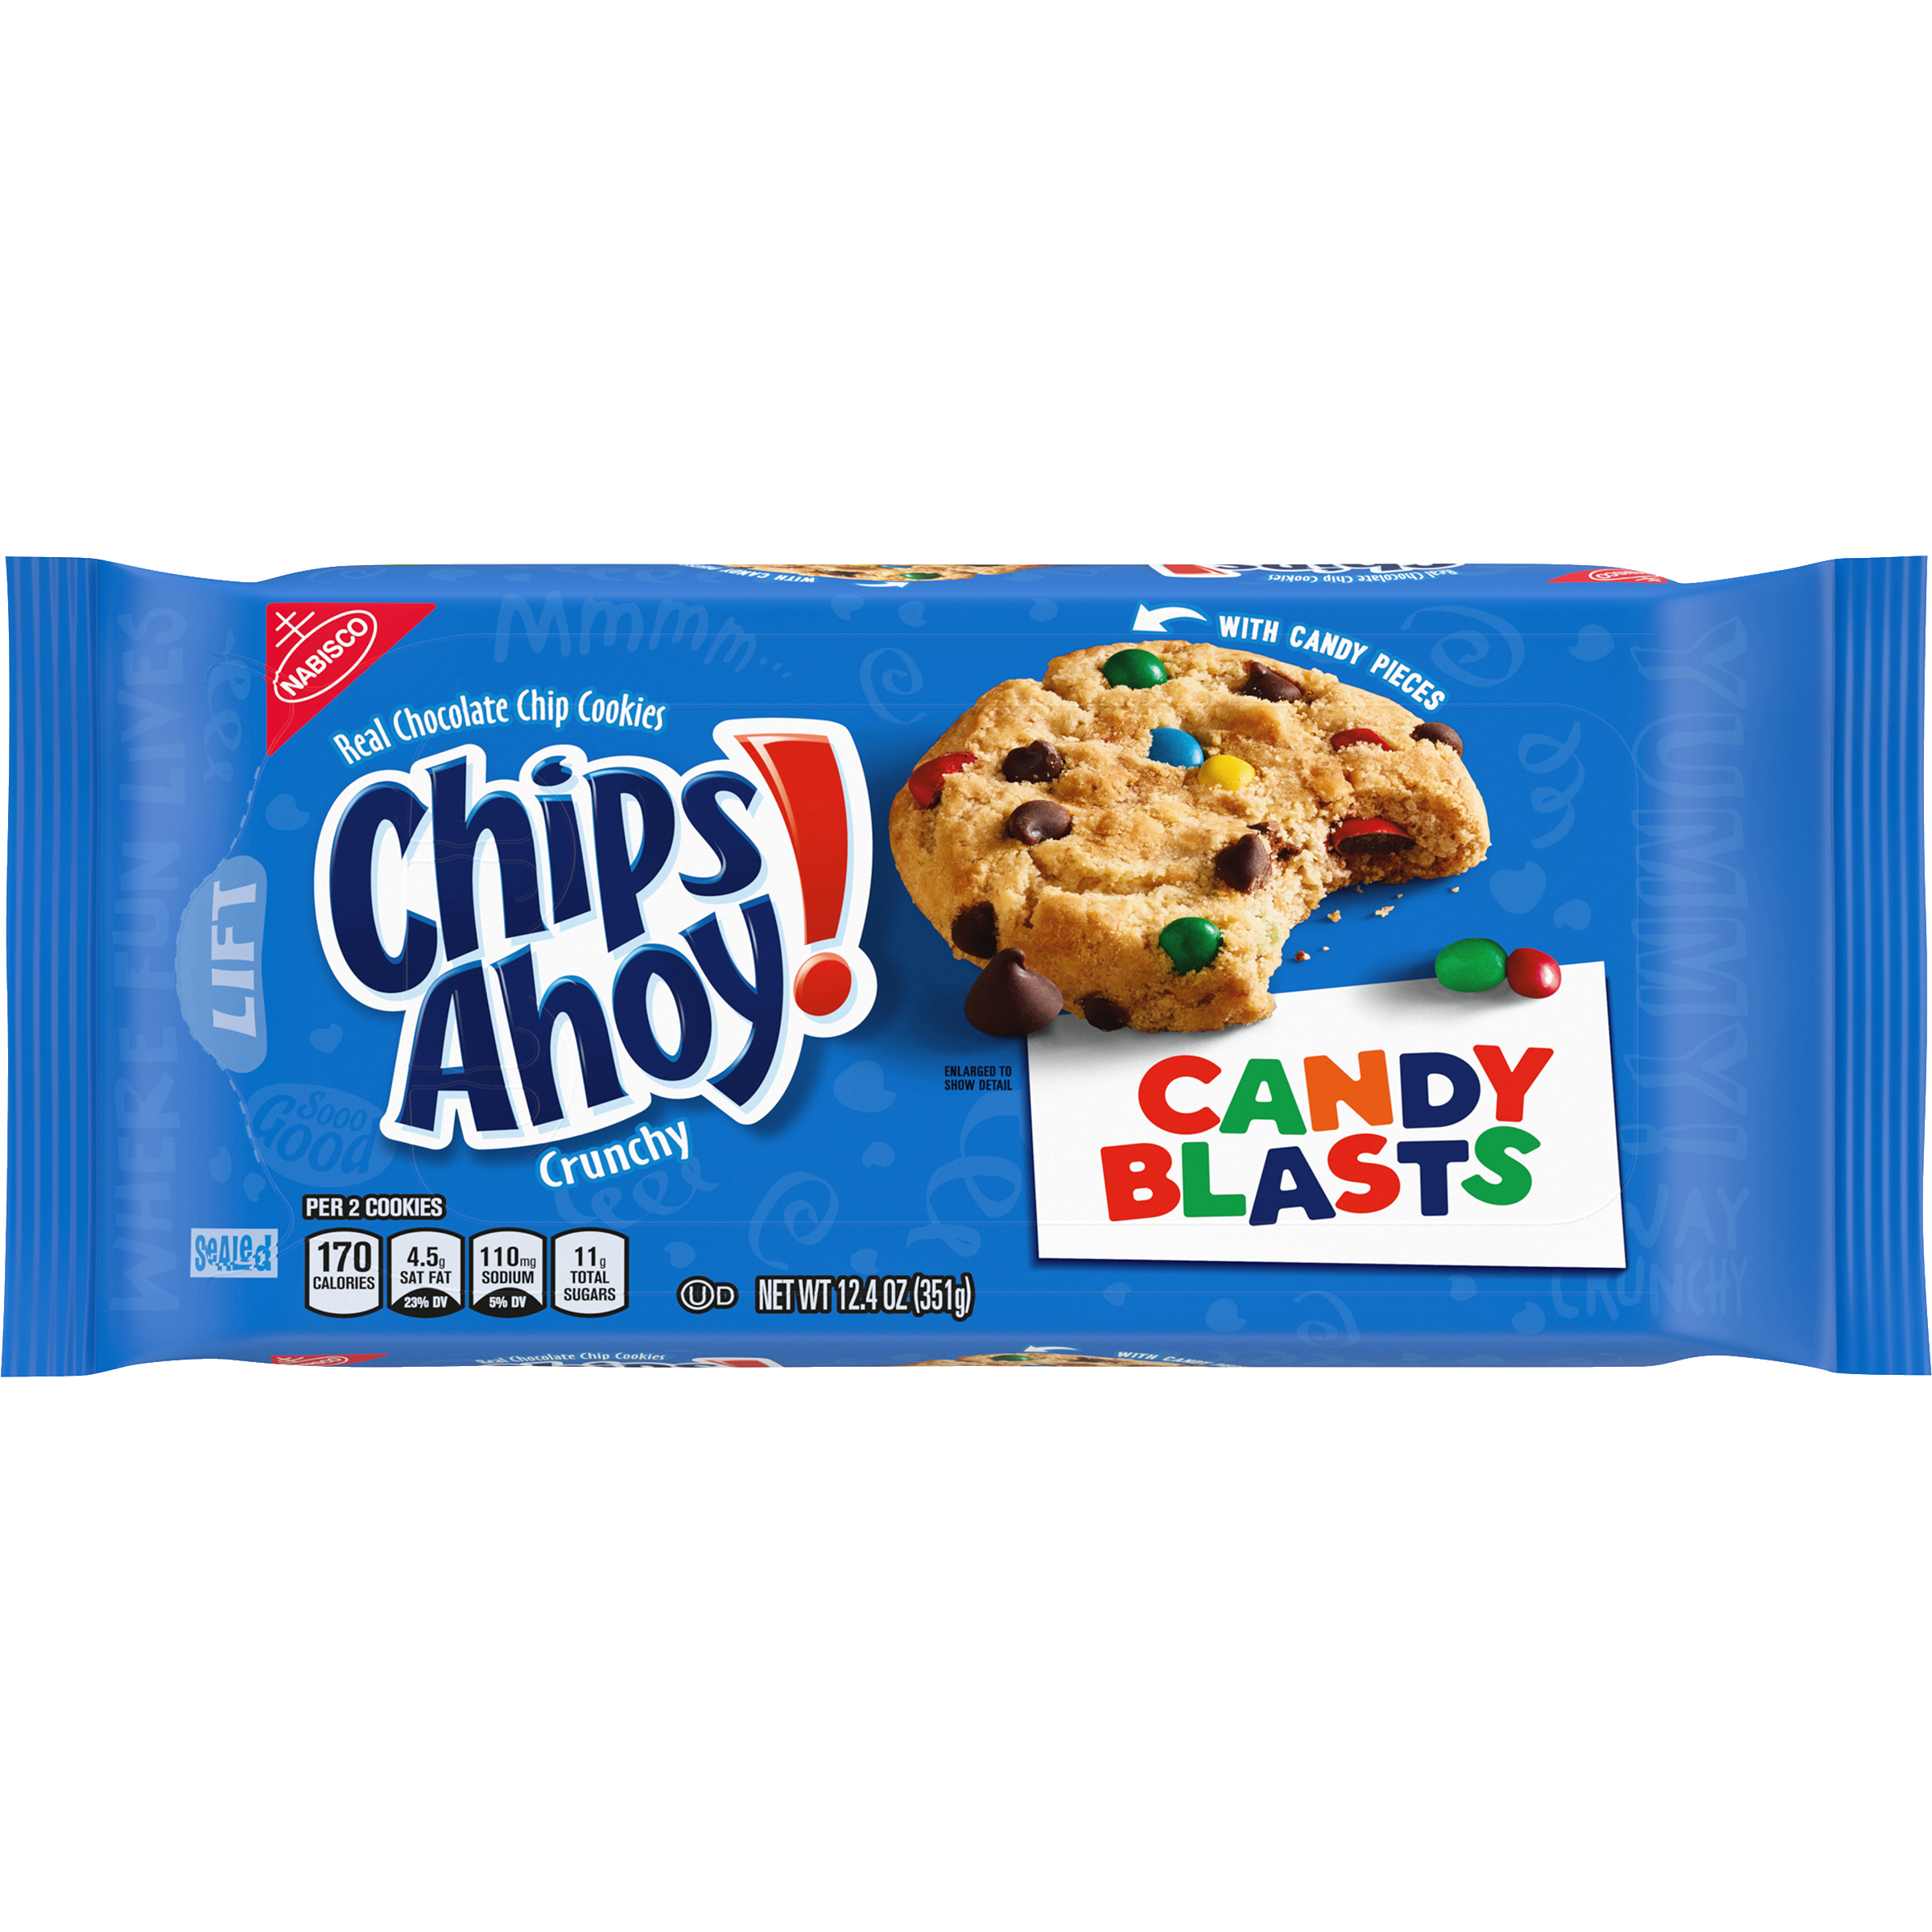 CHIPS AHOY! Candy Blasts Cookies, 12.4 oz-1